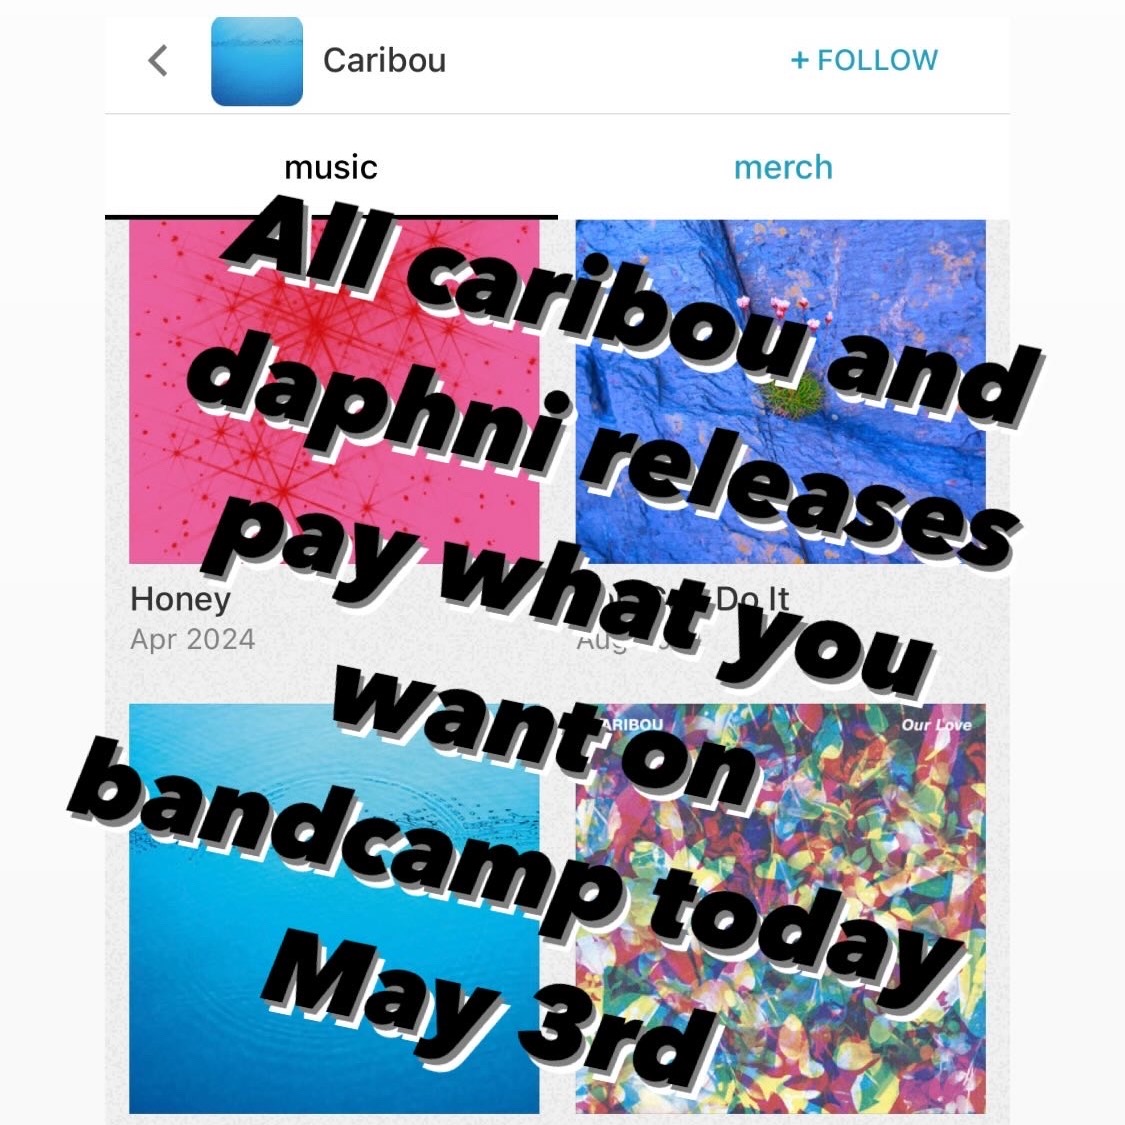 All caribou and daphni releases pay what you want on @Bandcamp today May 3rd: caribouband.bandcamp.com